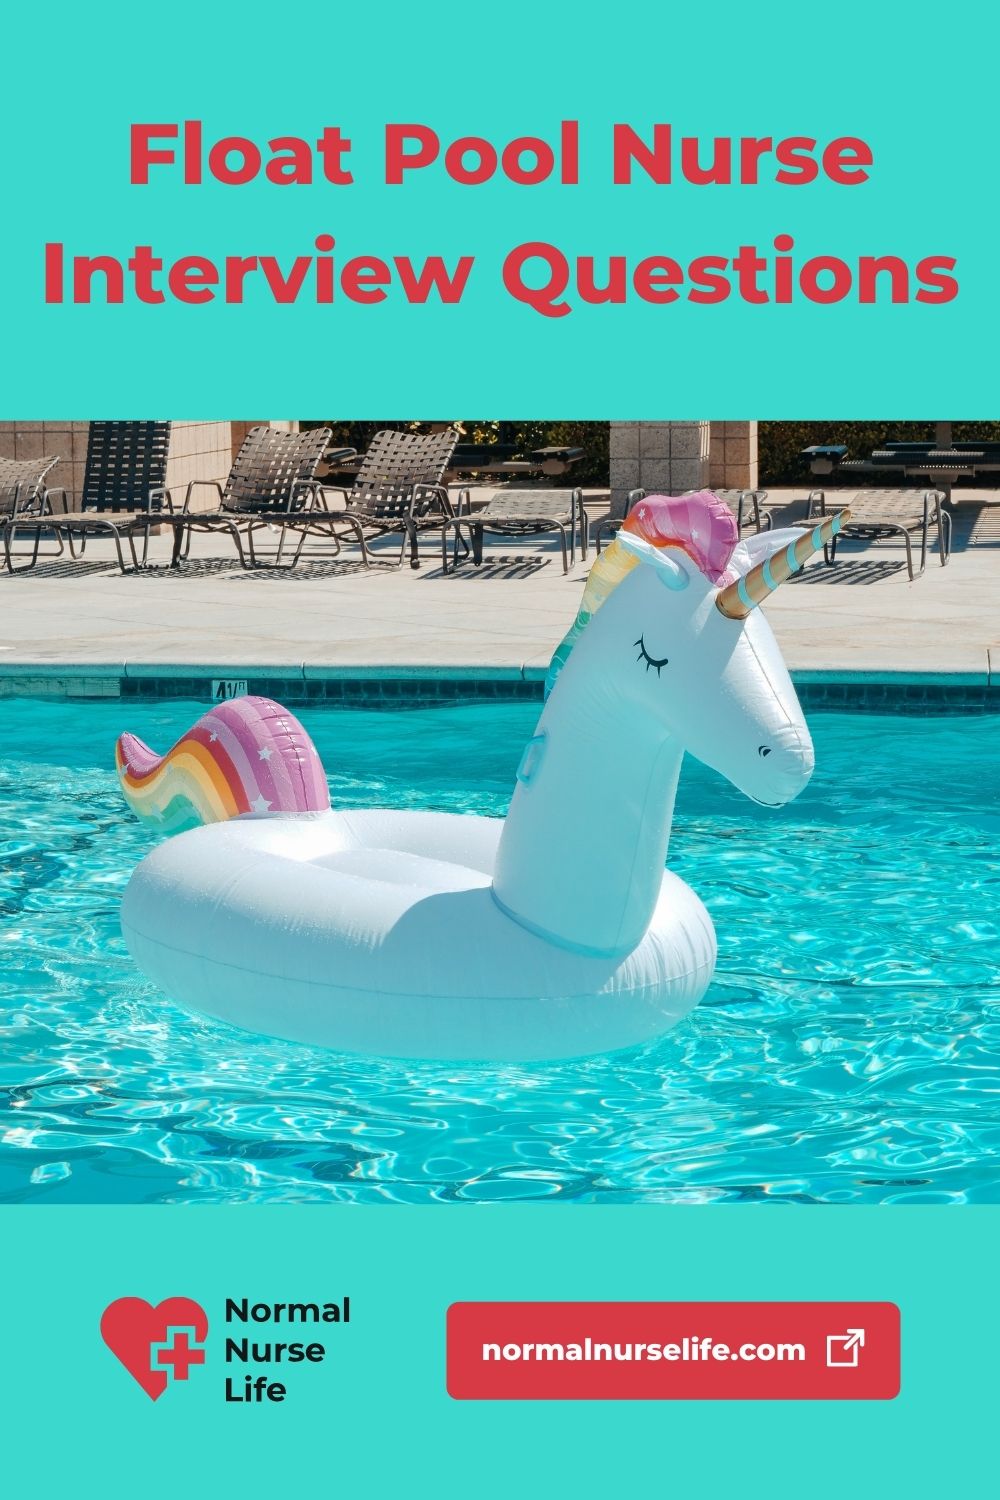 Interview questions for float pool nurses